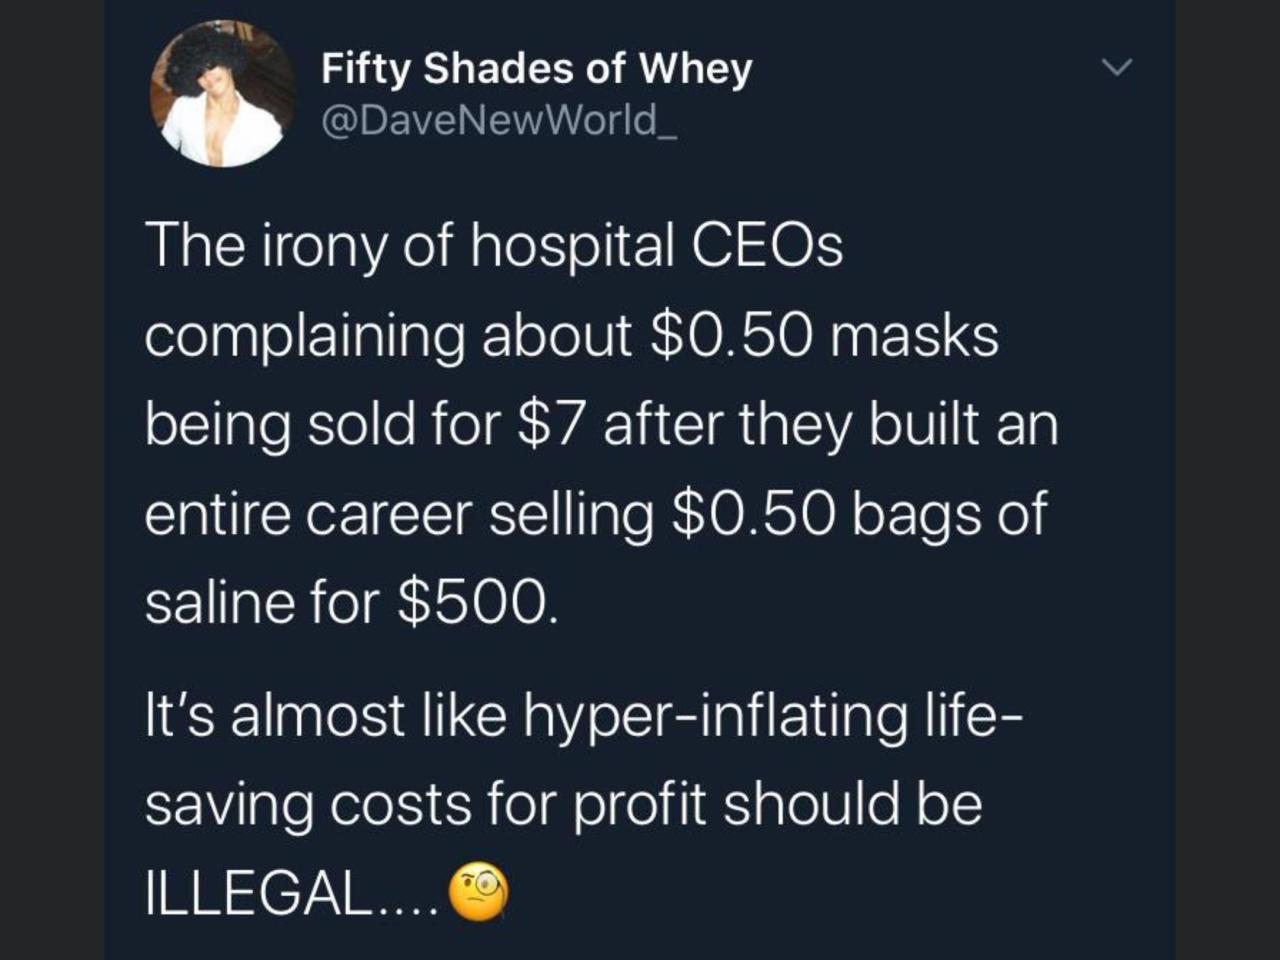 effective business communication - Fifty Shades of Whey The irony of hospital CEOs complaining about $0.50 masks being sold for $7 after they built an entire career selling $0.50 bags of saline for $500. It's almost hyperinflating life saving costs for pr